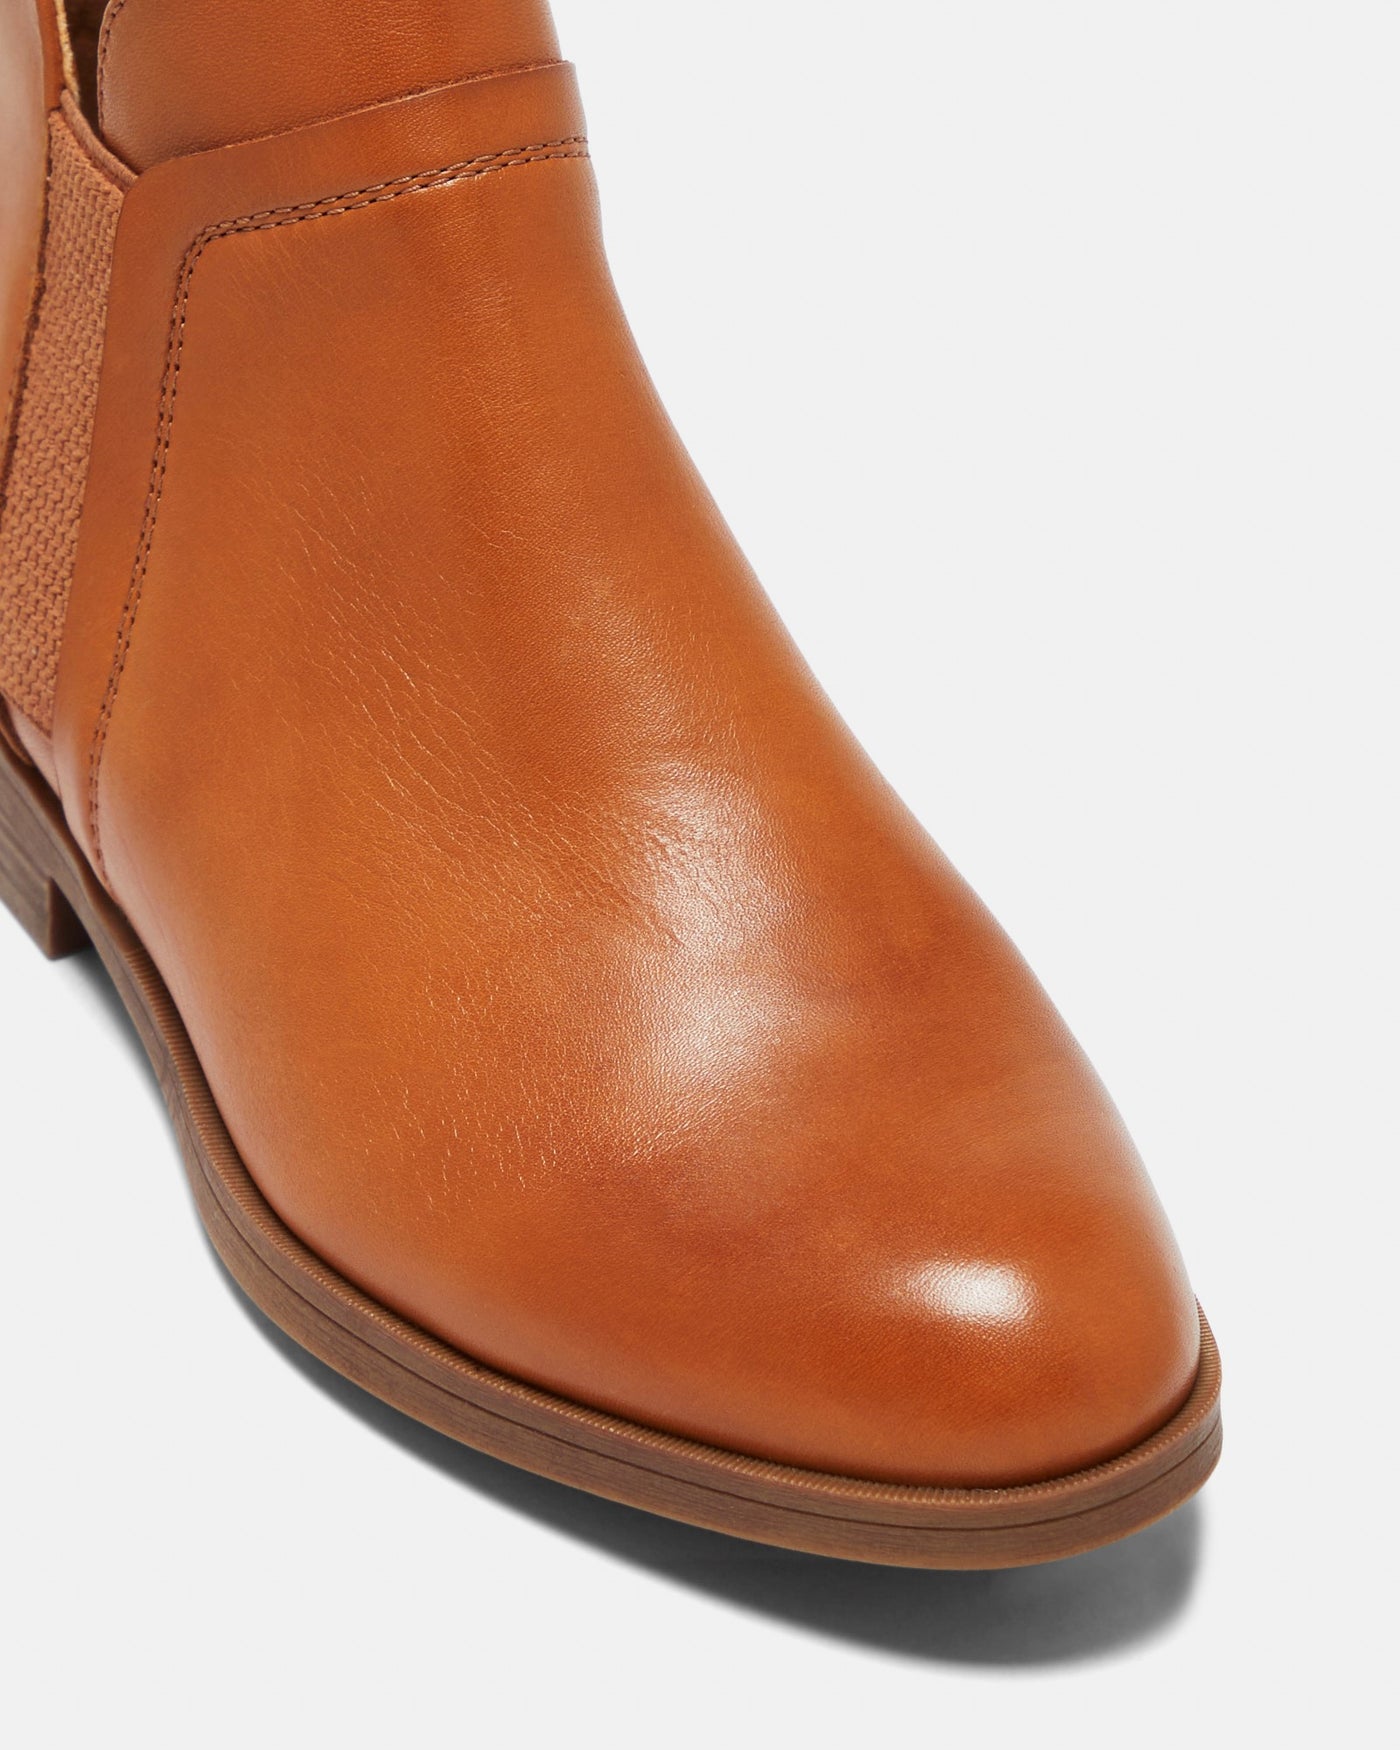 HUSH PUPPIES CATALINA TAN - Women Boots - Collective Shoes 